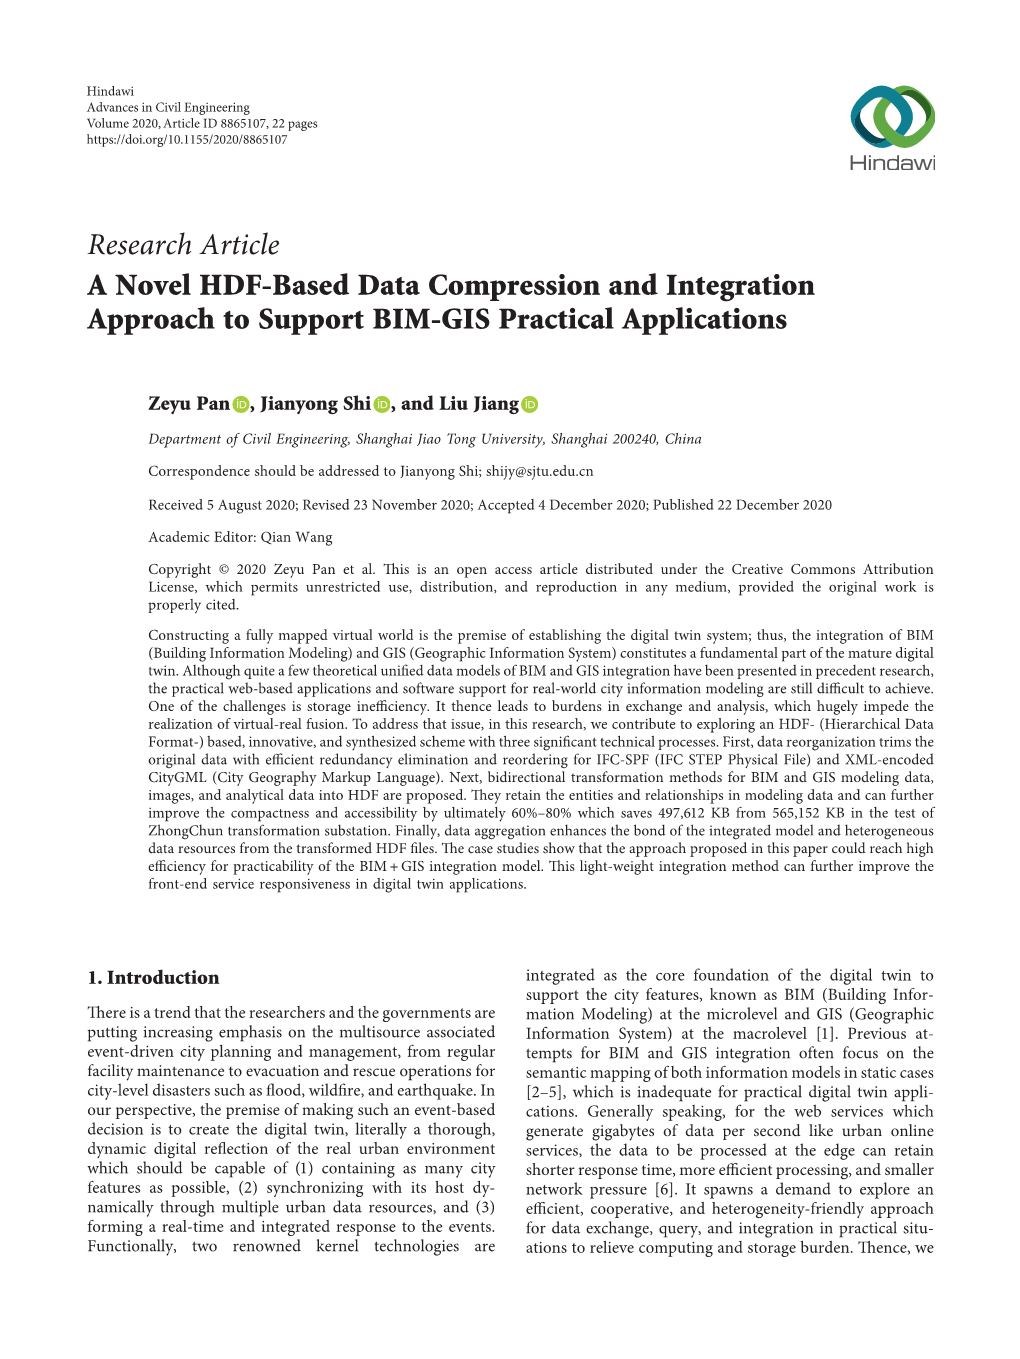 A Novel HDF-Based Data Compression and Integration Approach to Support BIM-GIS Practical Applications